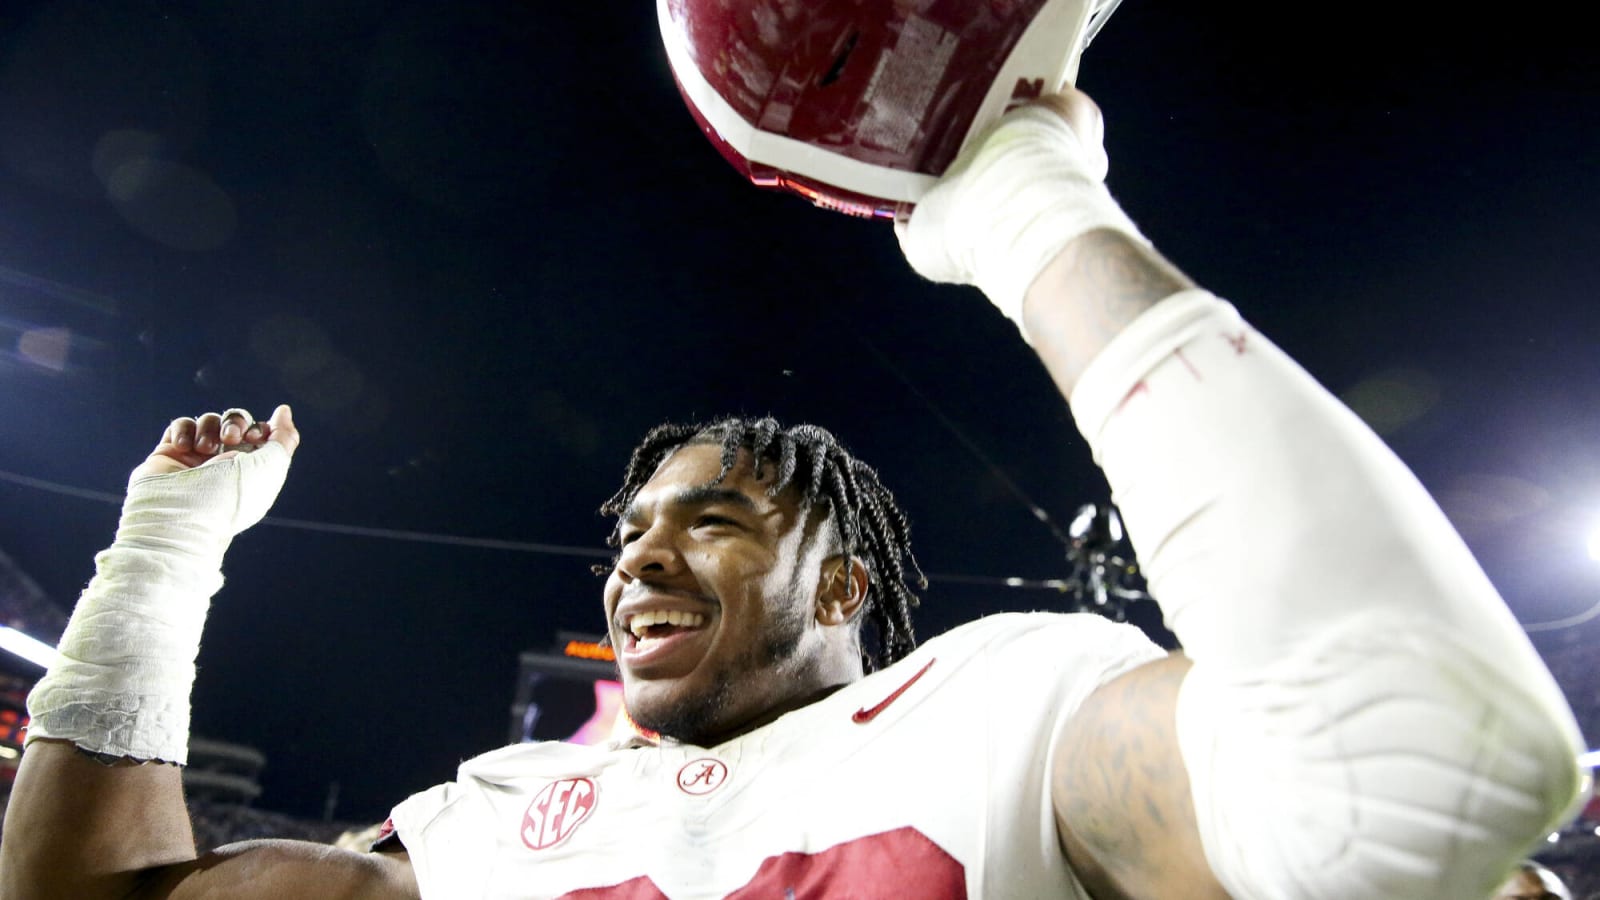 Alabama starting LB confirms he is sticking with the Tide